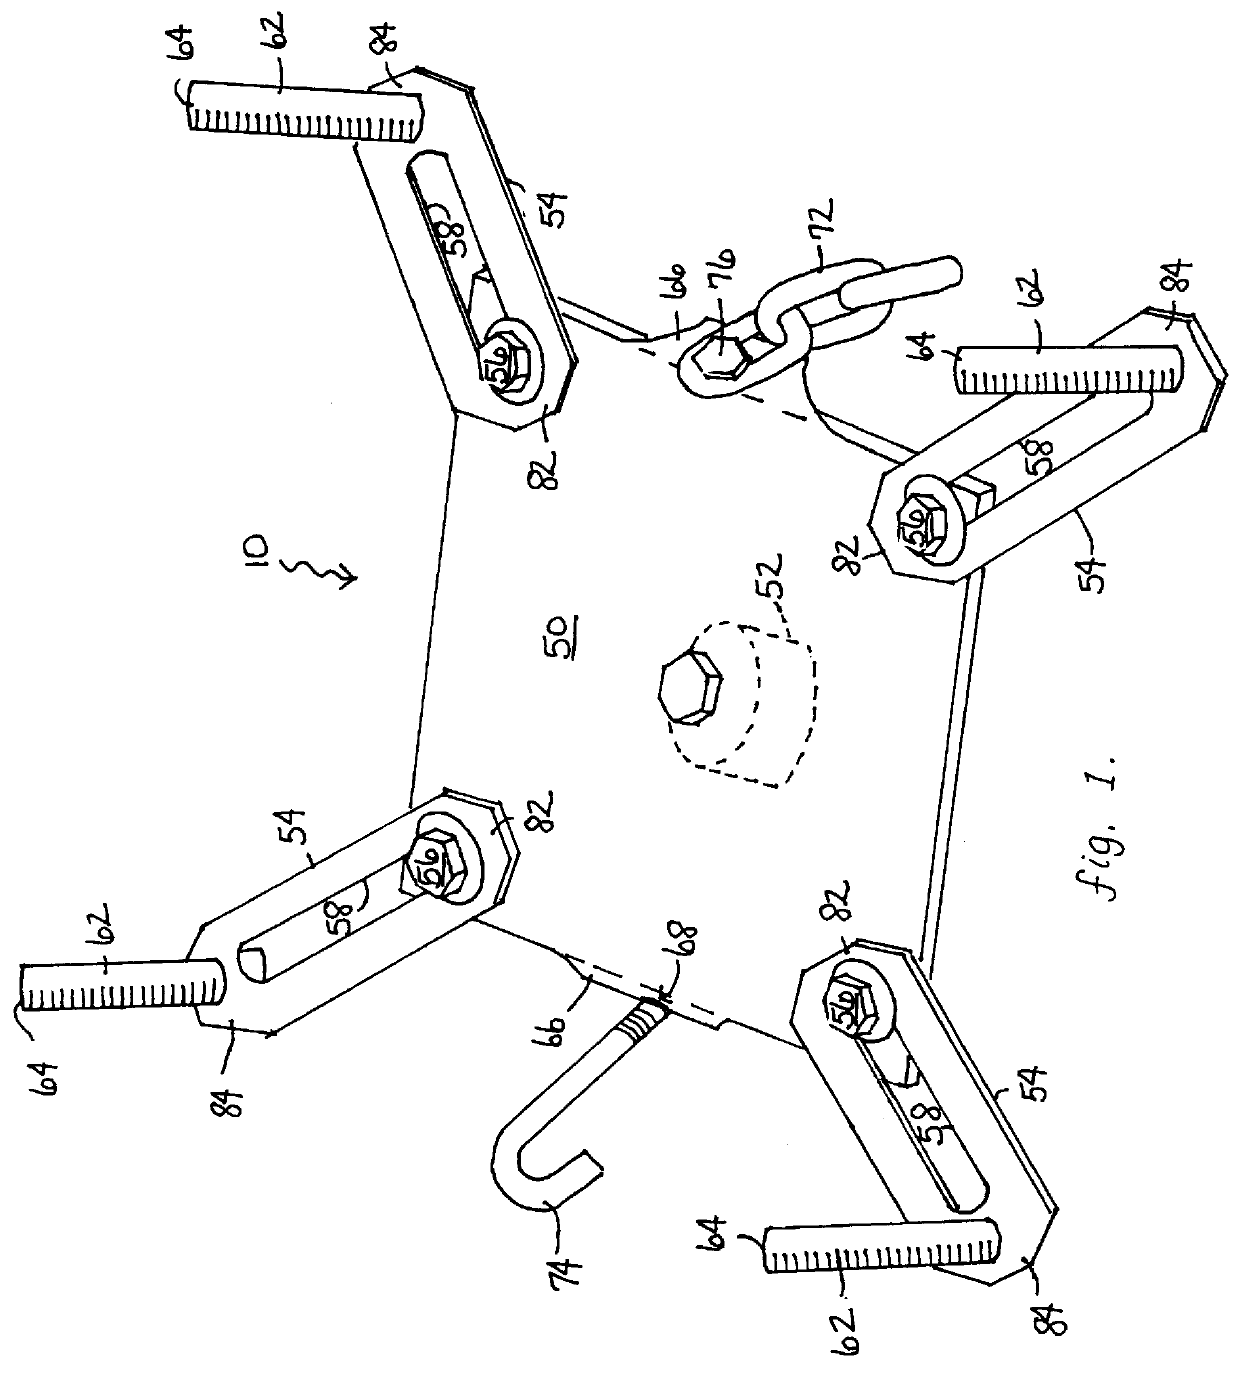 Converter for converting a conventional car jack into a transmission jack